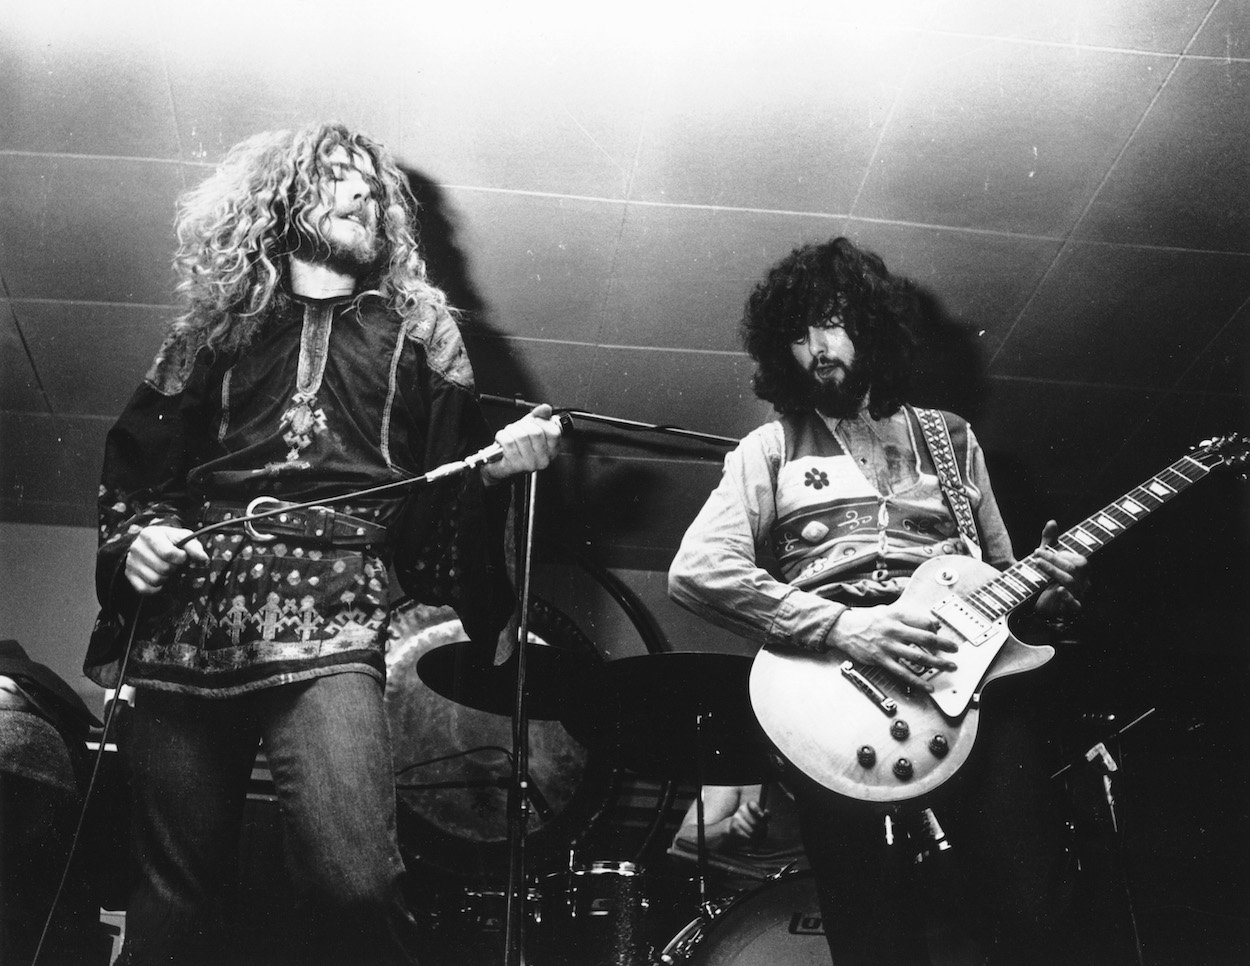 Robert Plant (left) and Jimmy Page, who both acted less than enthusiastic about a Led Zeppelin reunion in the mid-1980s, perform with Led Zeppelin in 1971.